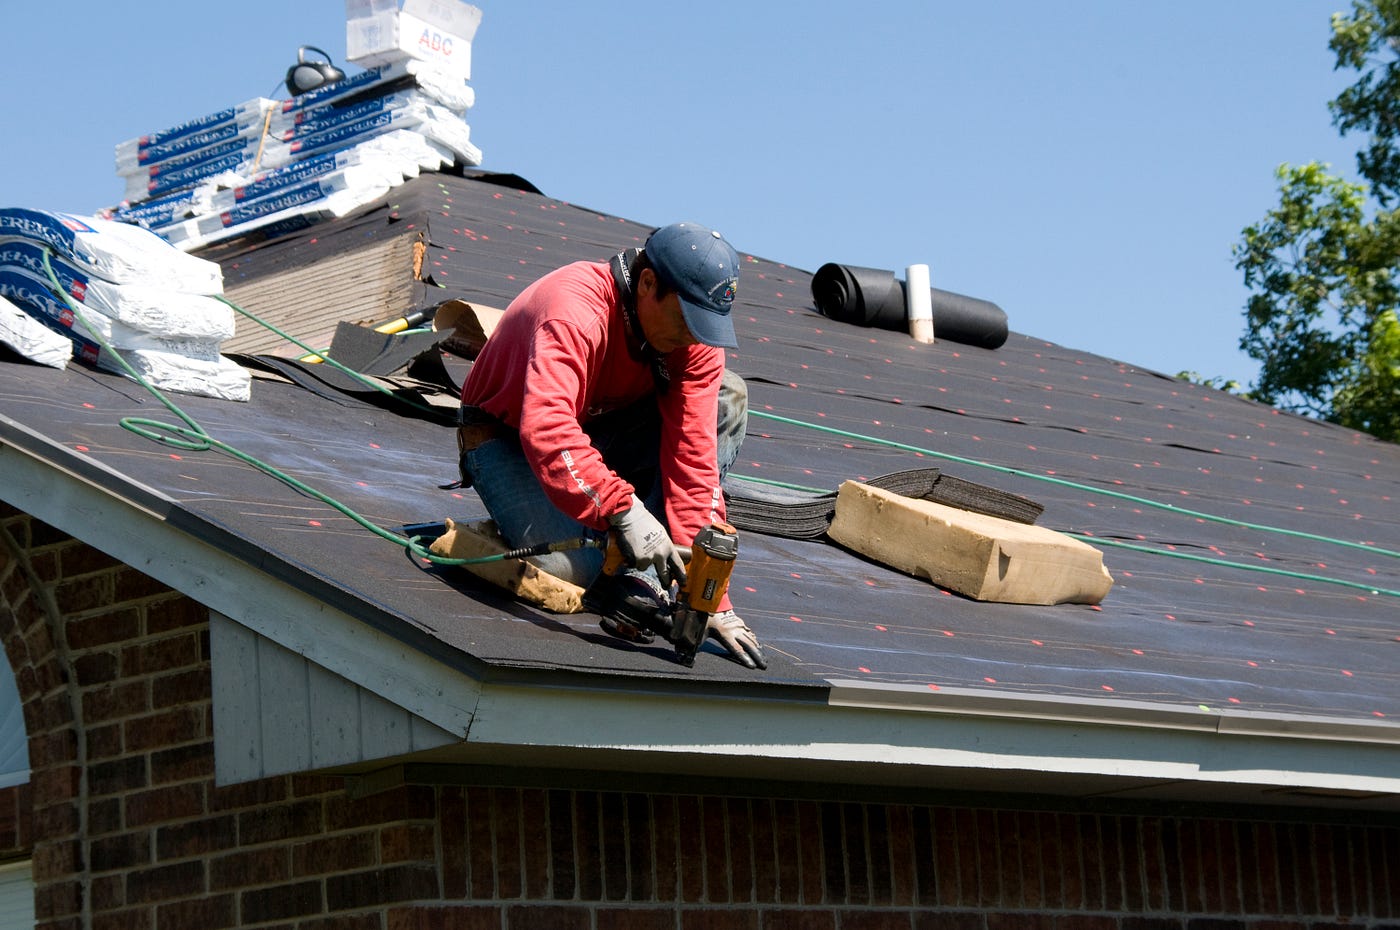 Roof Repair Fort Collins Co